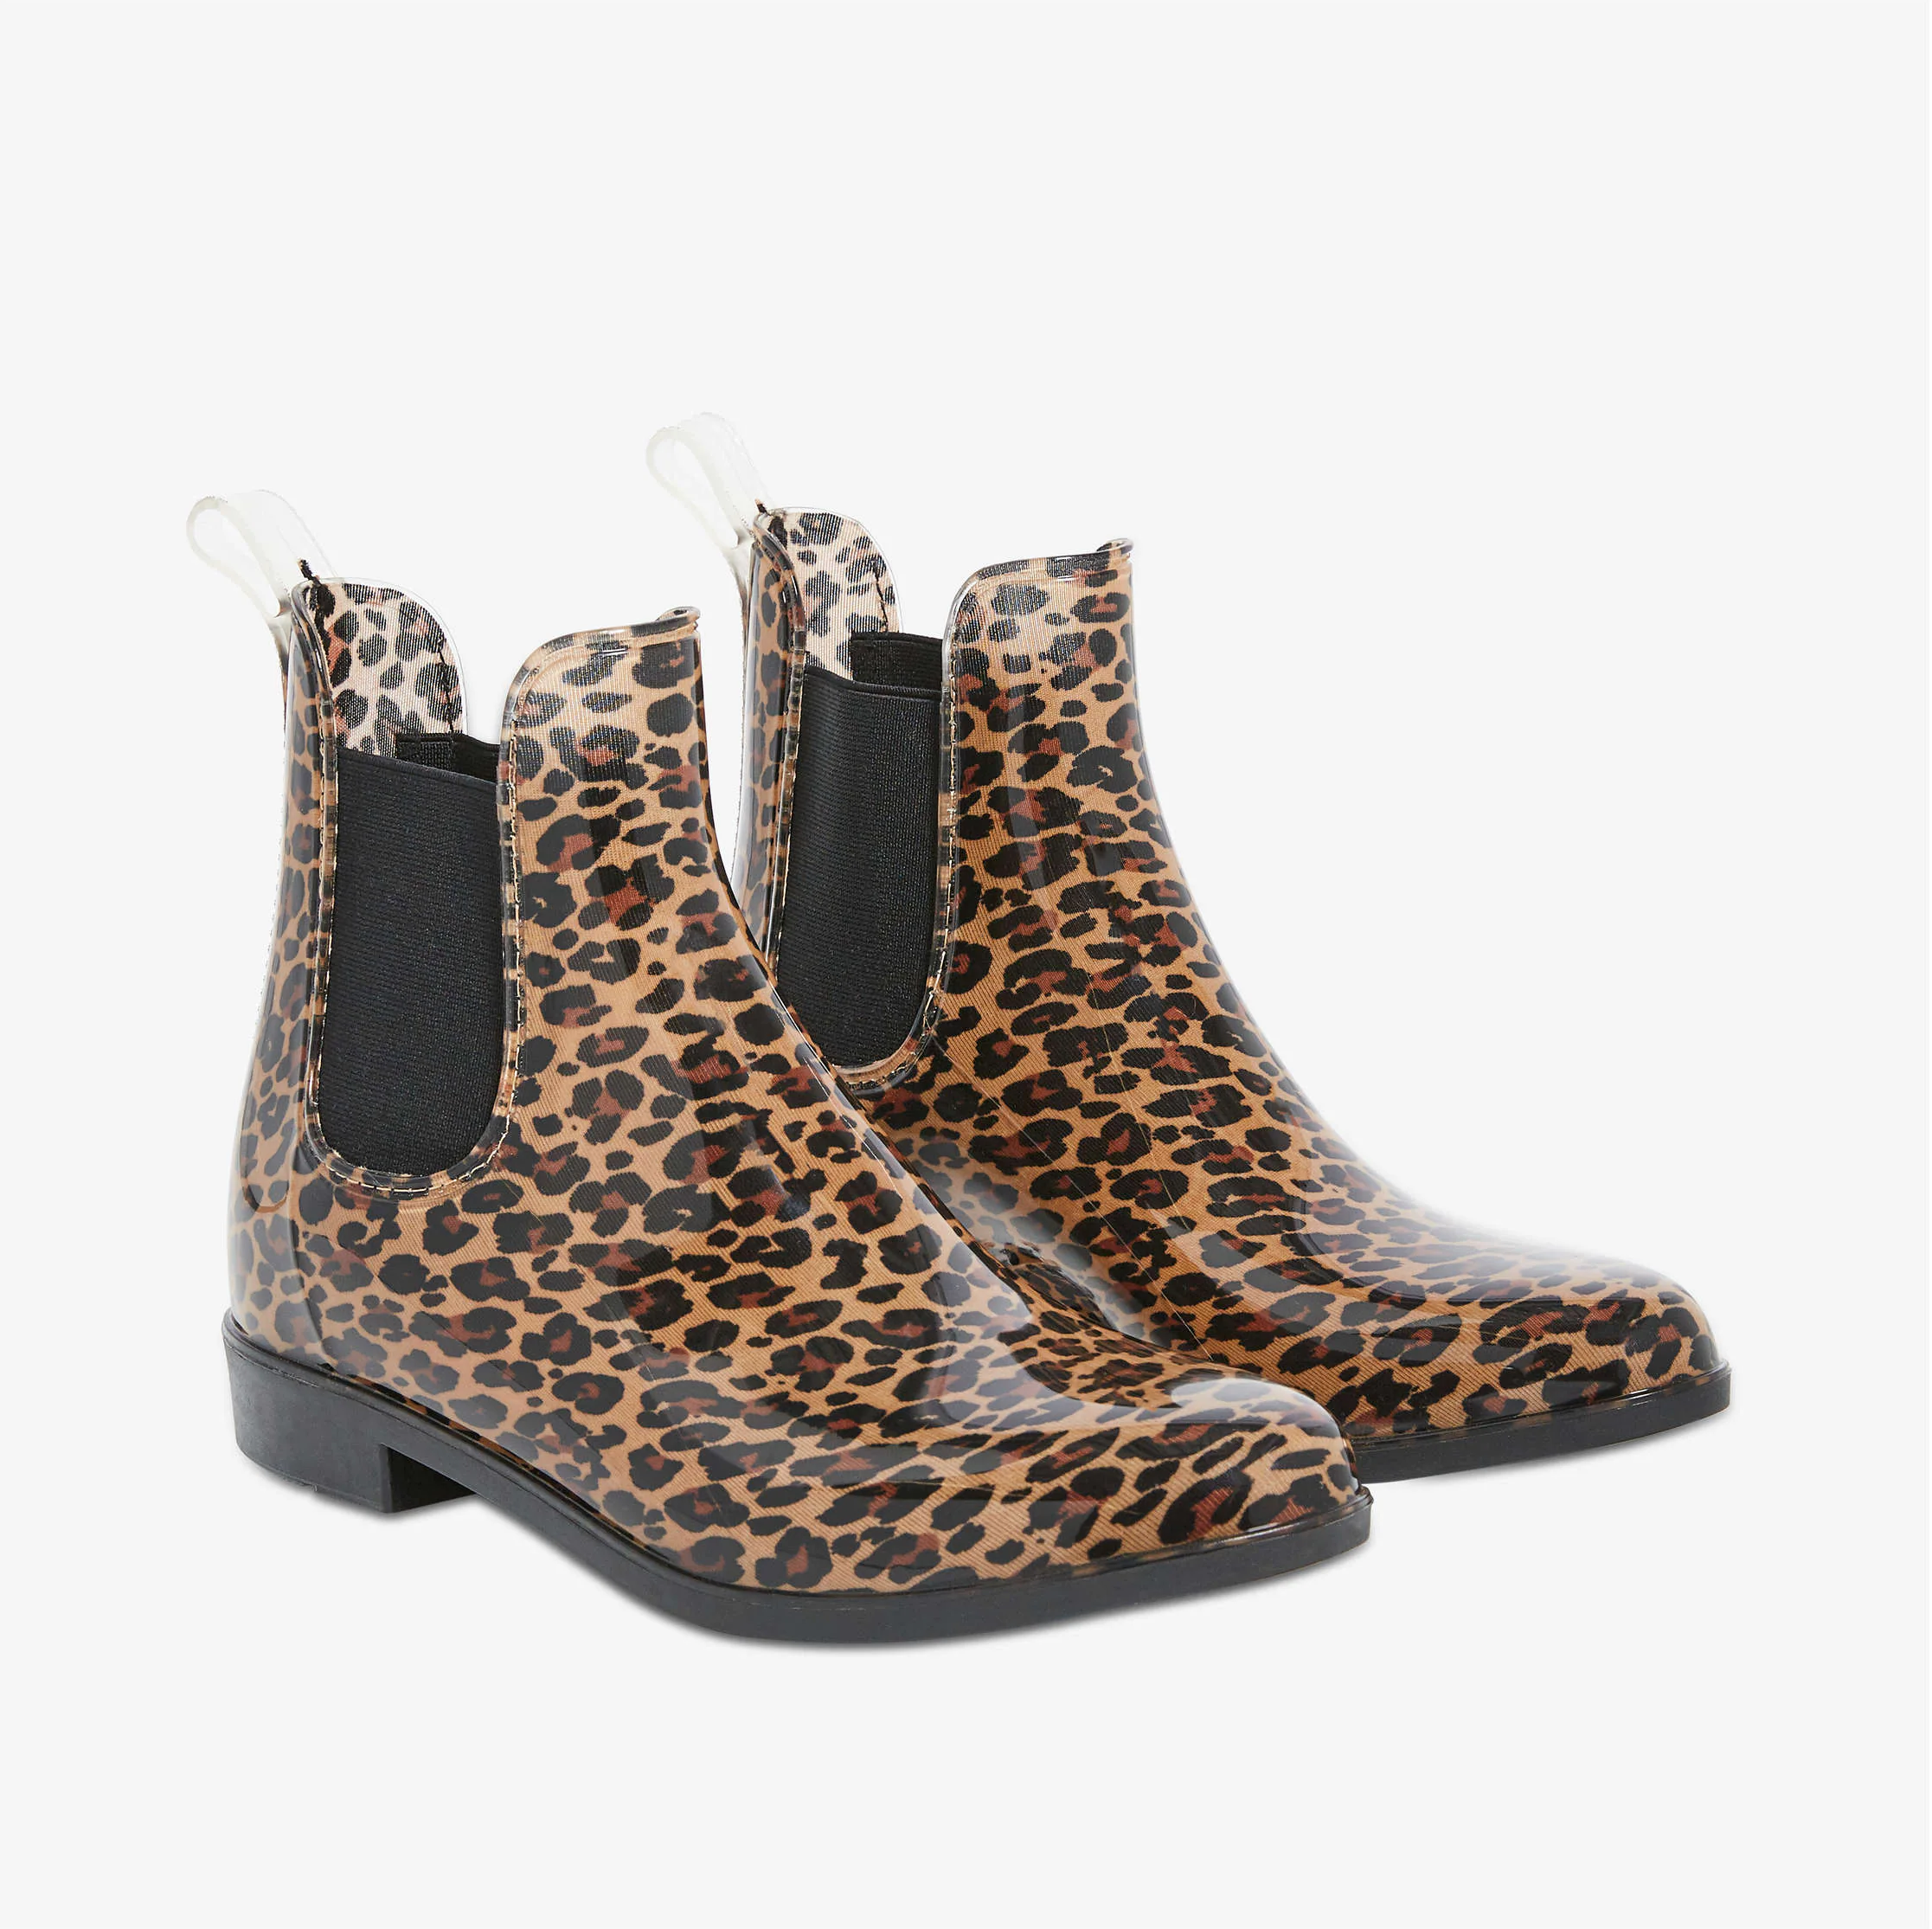 A pair of ankle-high rain boots with a leopard print